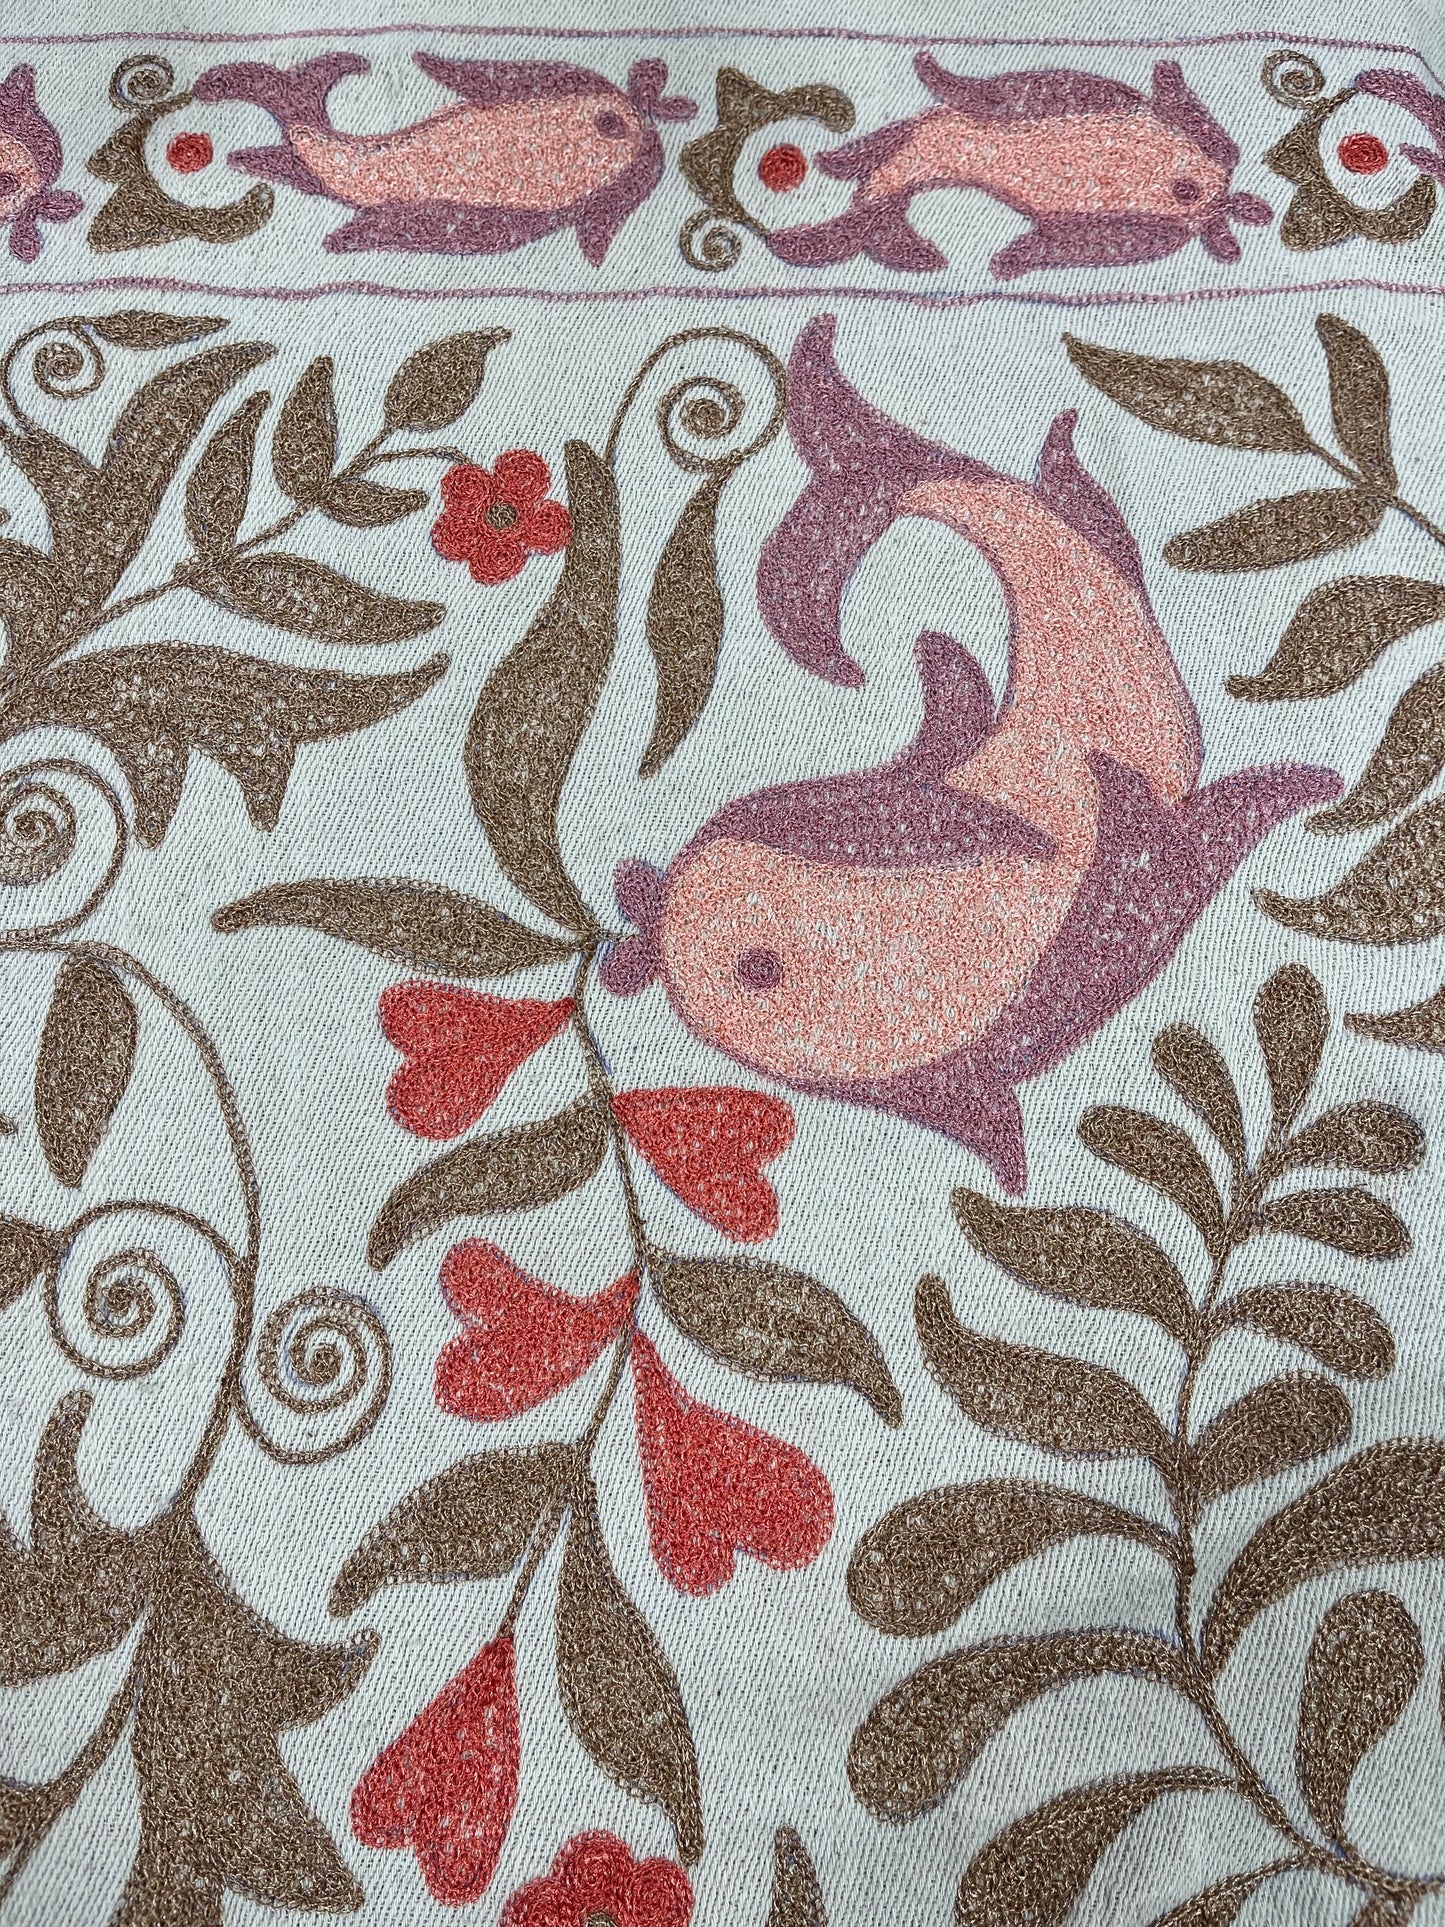 Bedspread with dolphin motif.